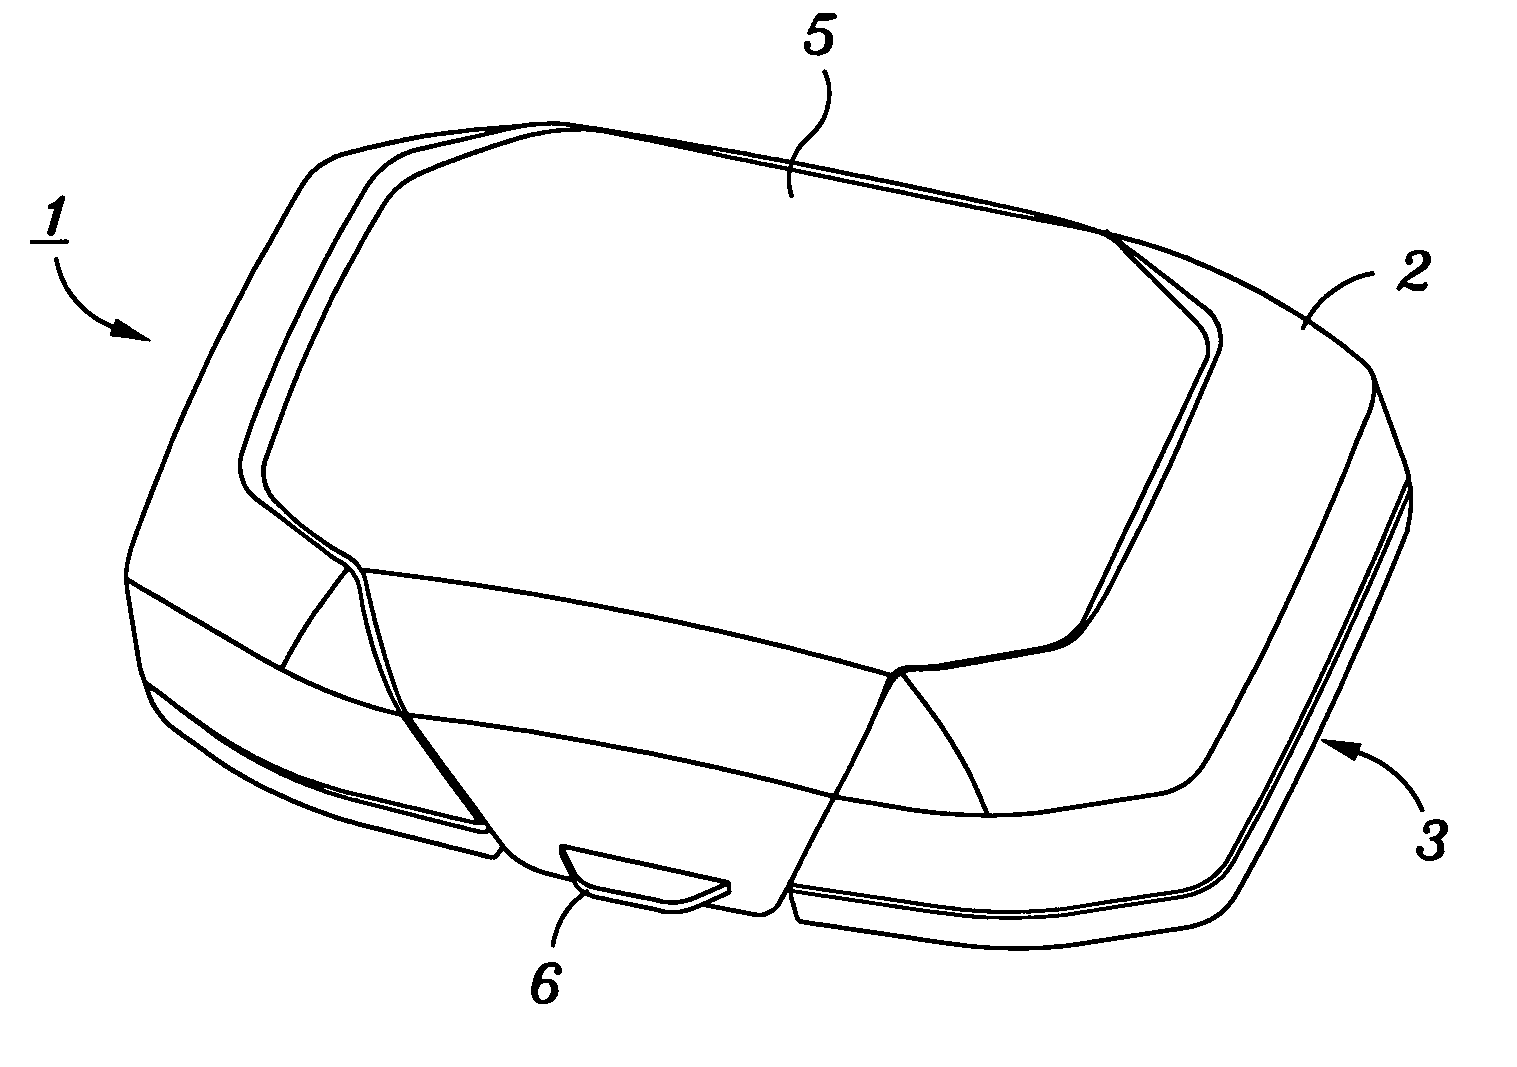 Interactive exercise device and system